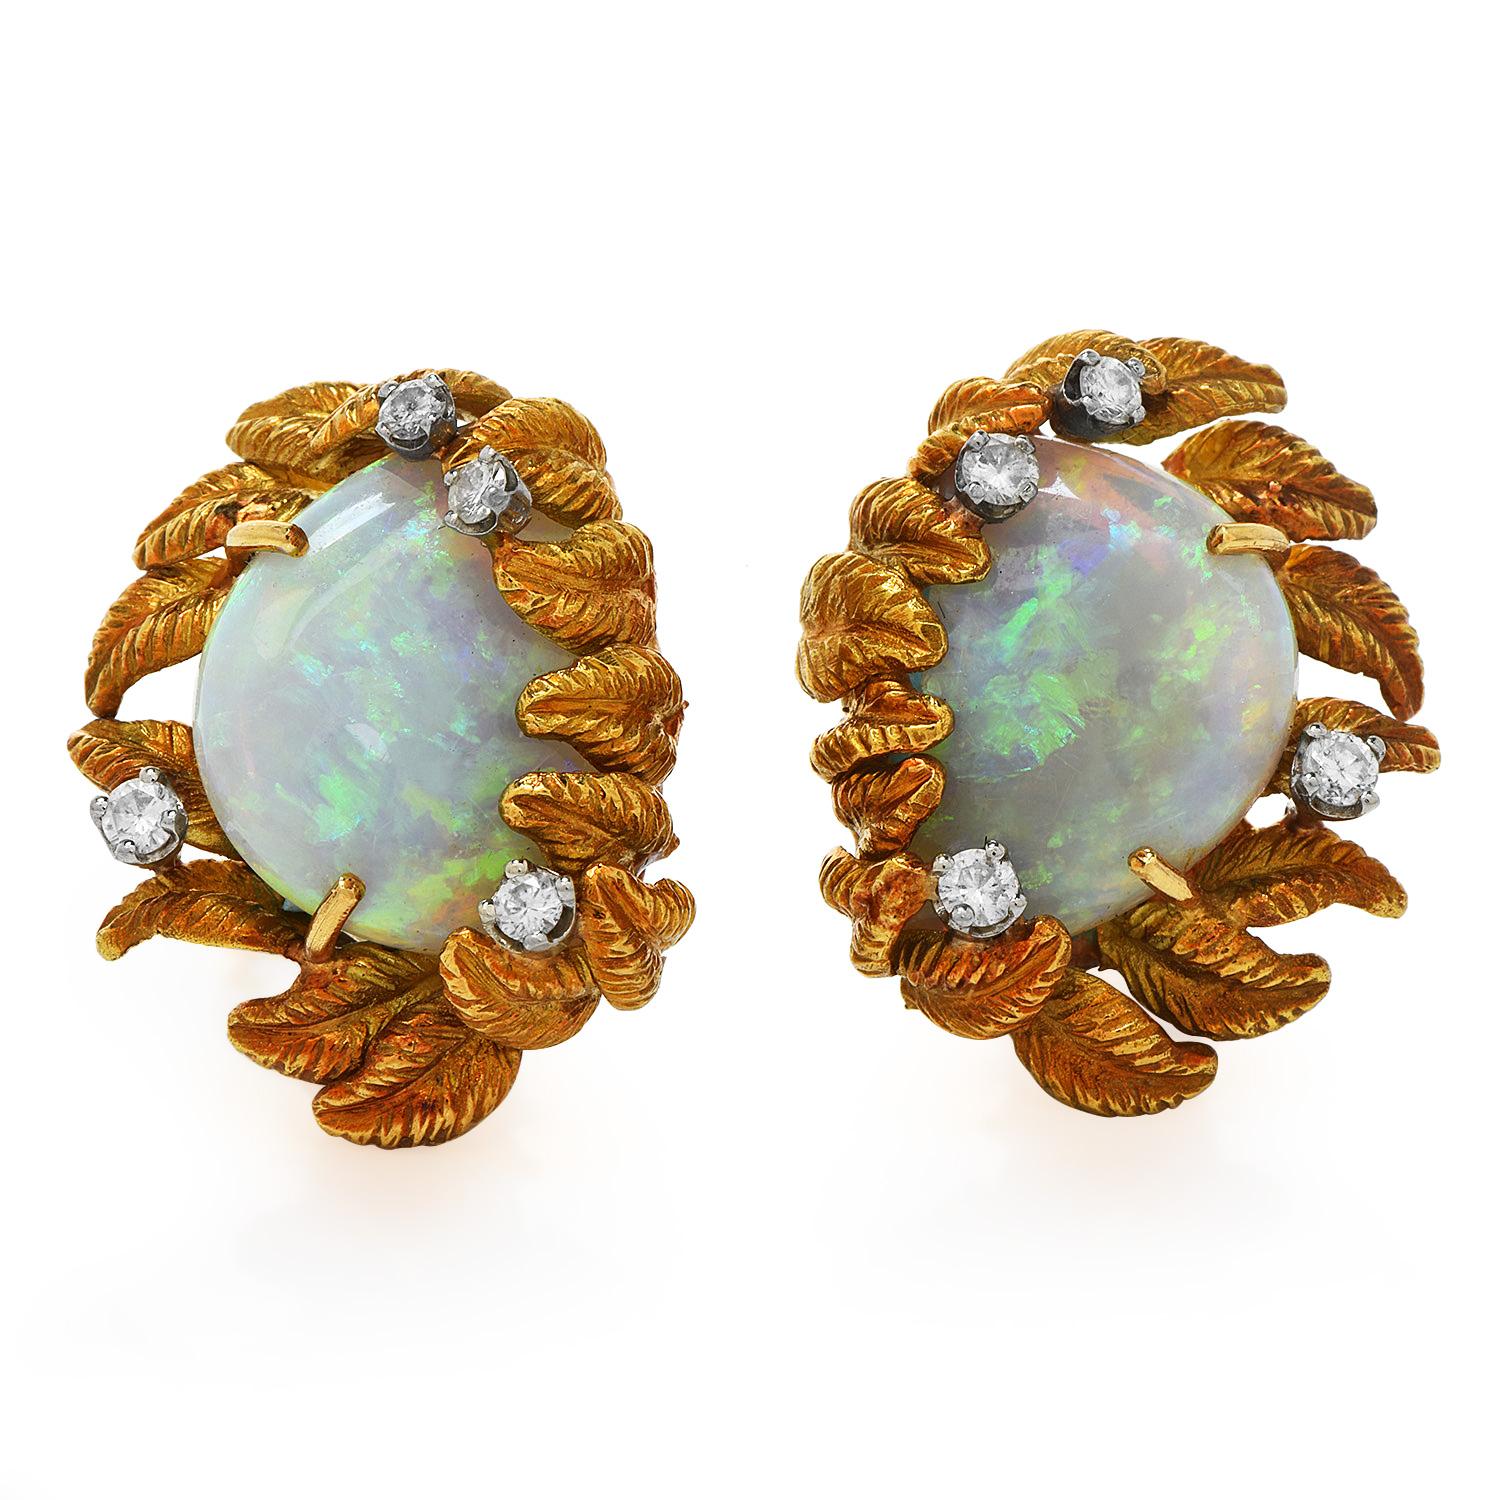 Compliment your Opal jewelry collection by adding these fiery opal earrings.

These eye-catching retro vintage earrings are crafted in solid 18k yellow gold with a leaf motif textured finish, weigh 14.7 grams, and measure 25 mm x 20 mm.

Exposing a